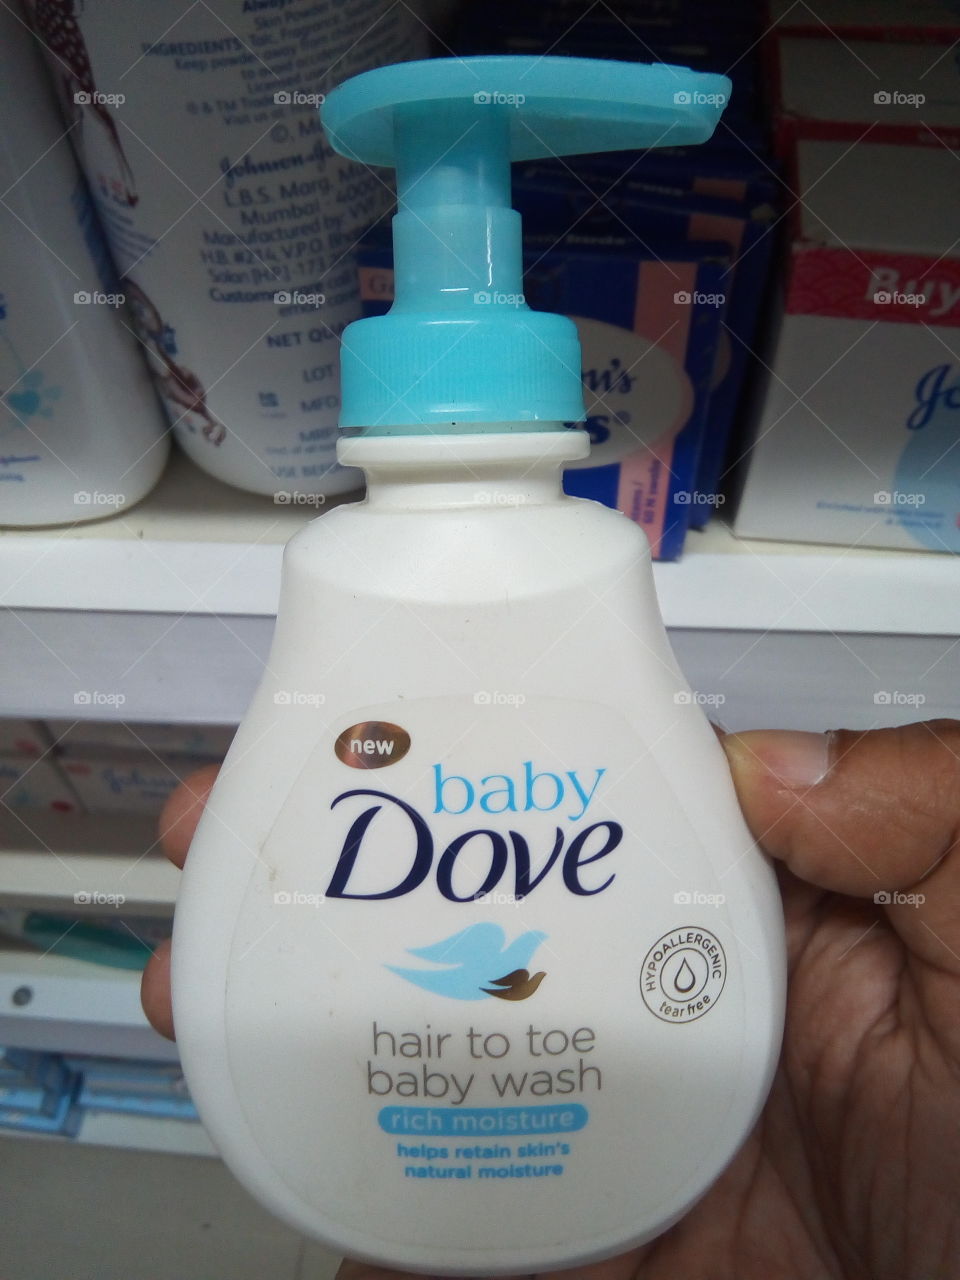 BABY DOVE FOR BABY WASH.